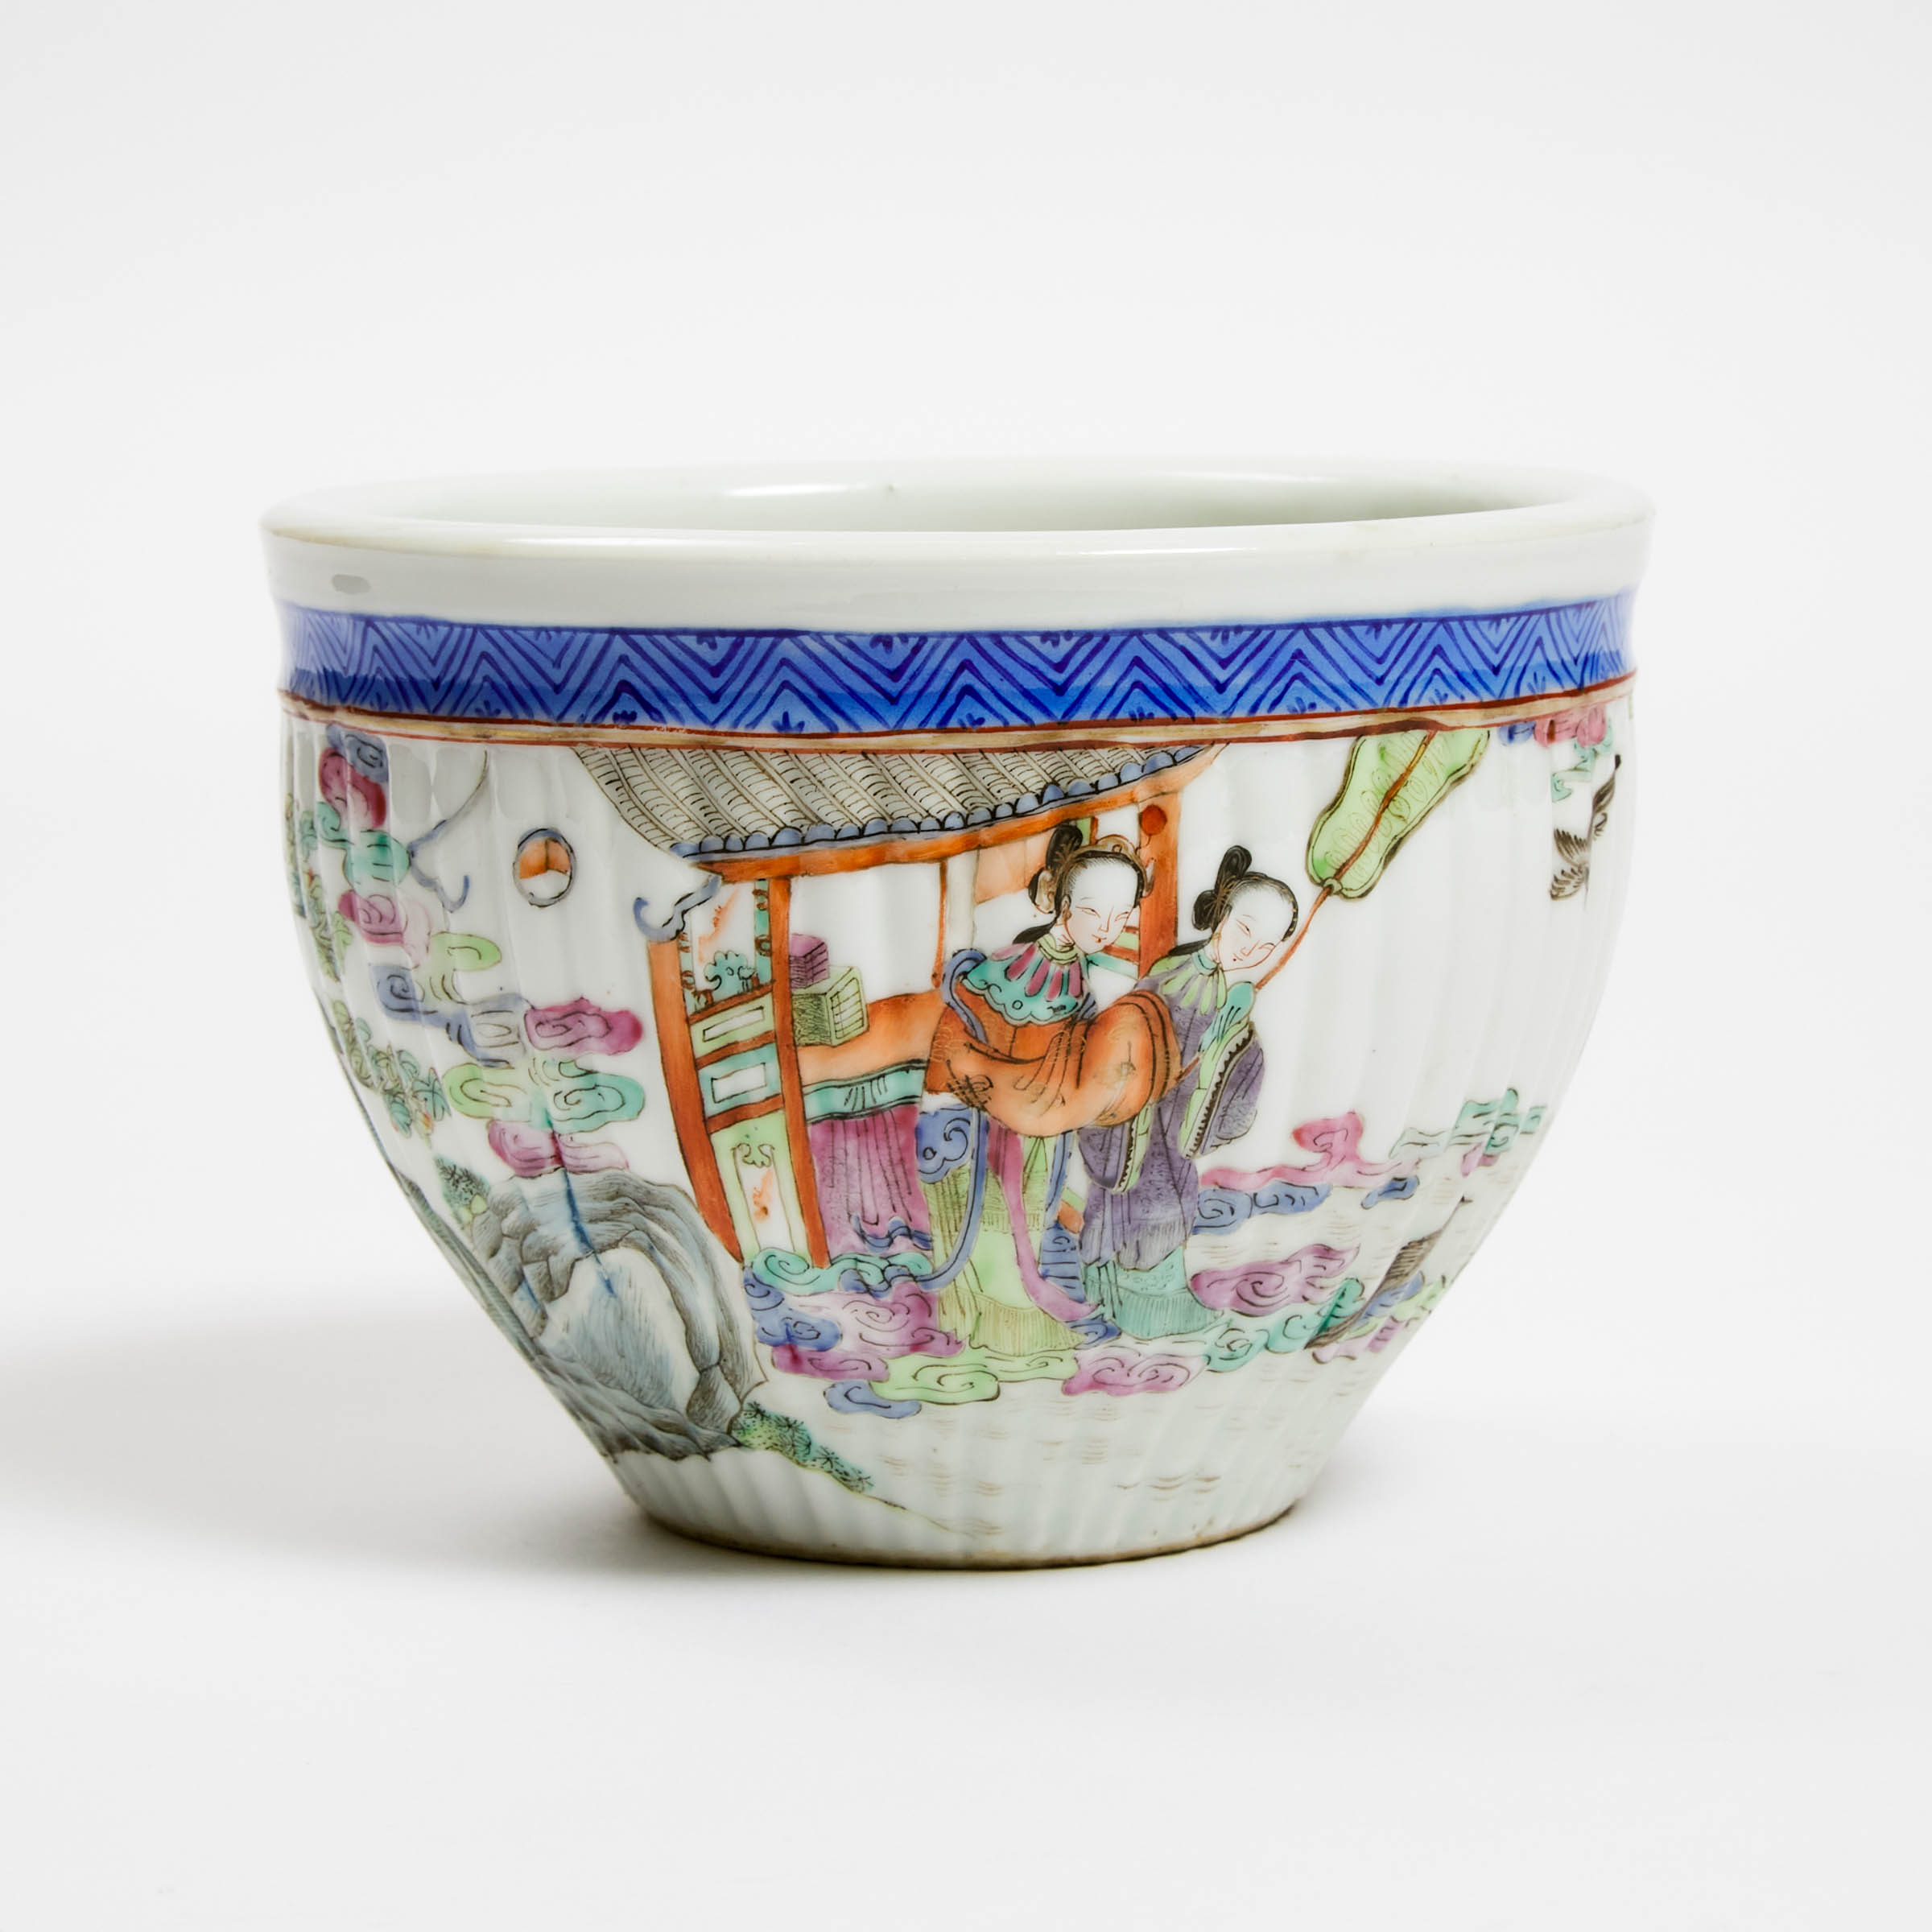 A Small Famille Rose Fluted Jardinière, Tongzhi Period (1862-1874)